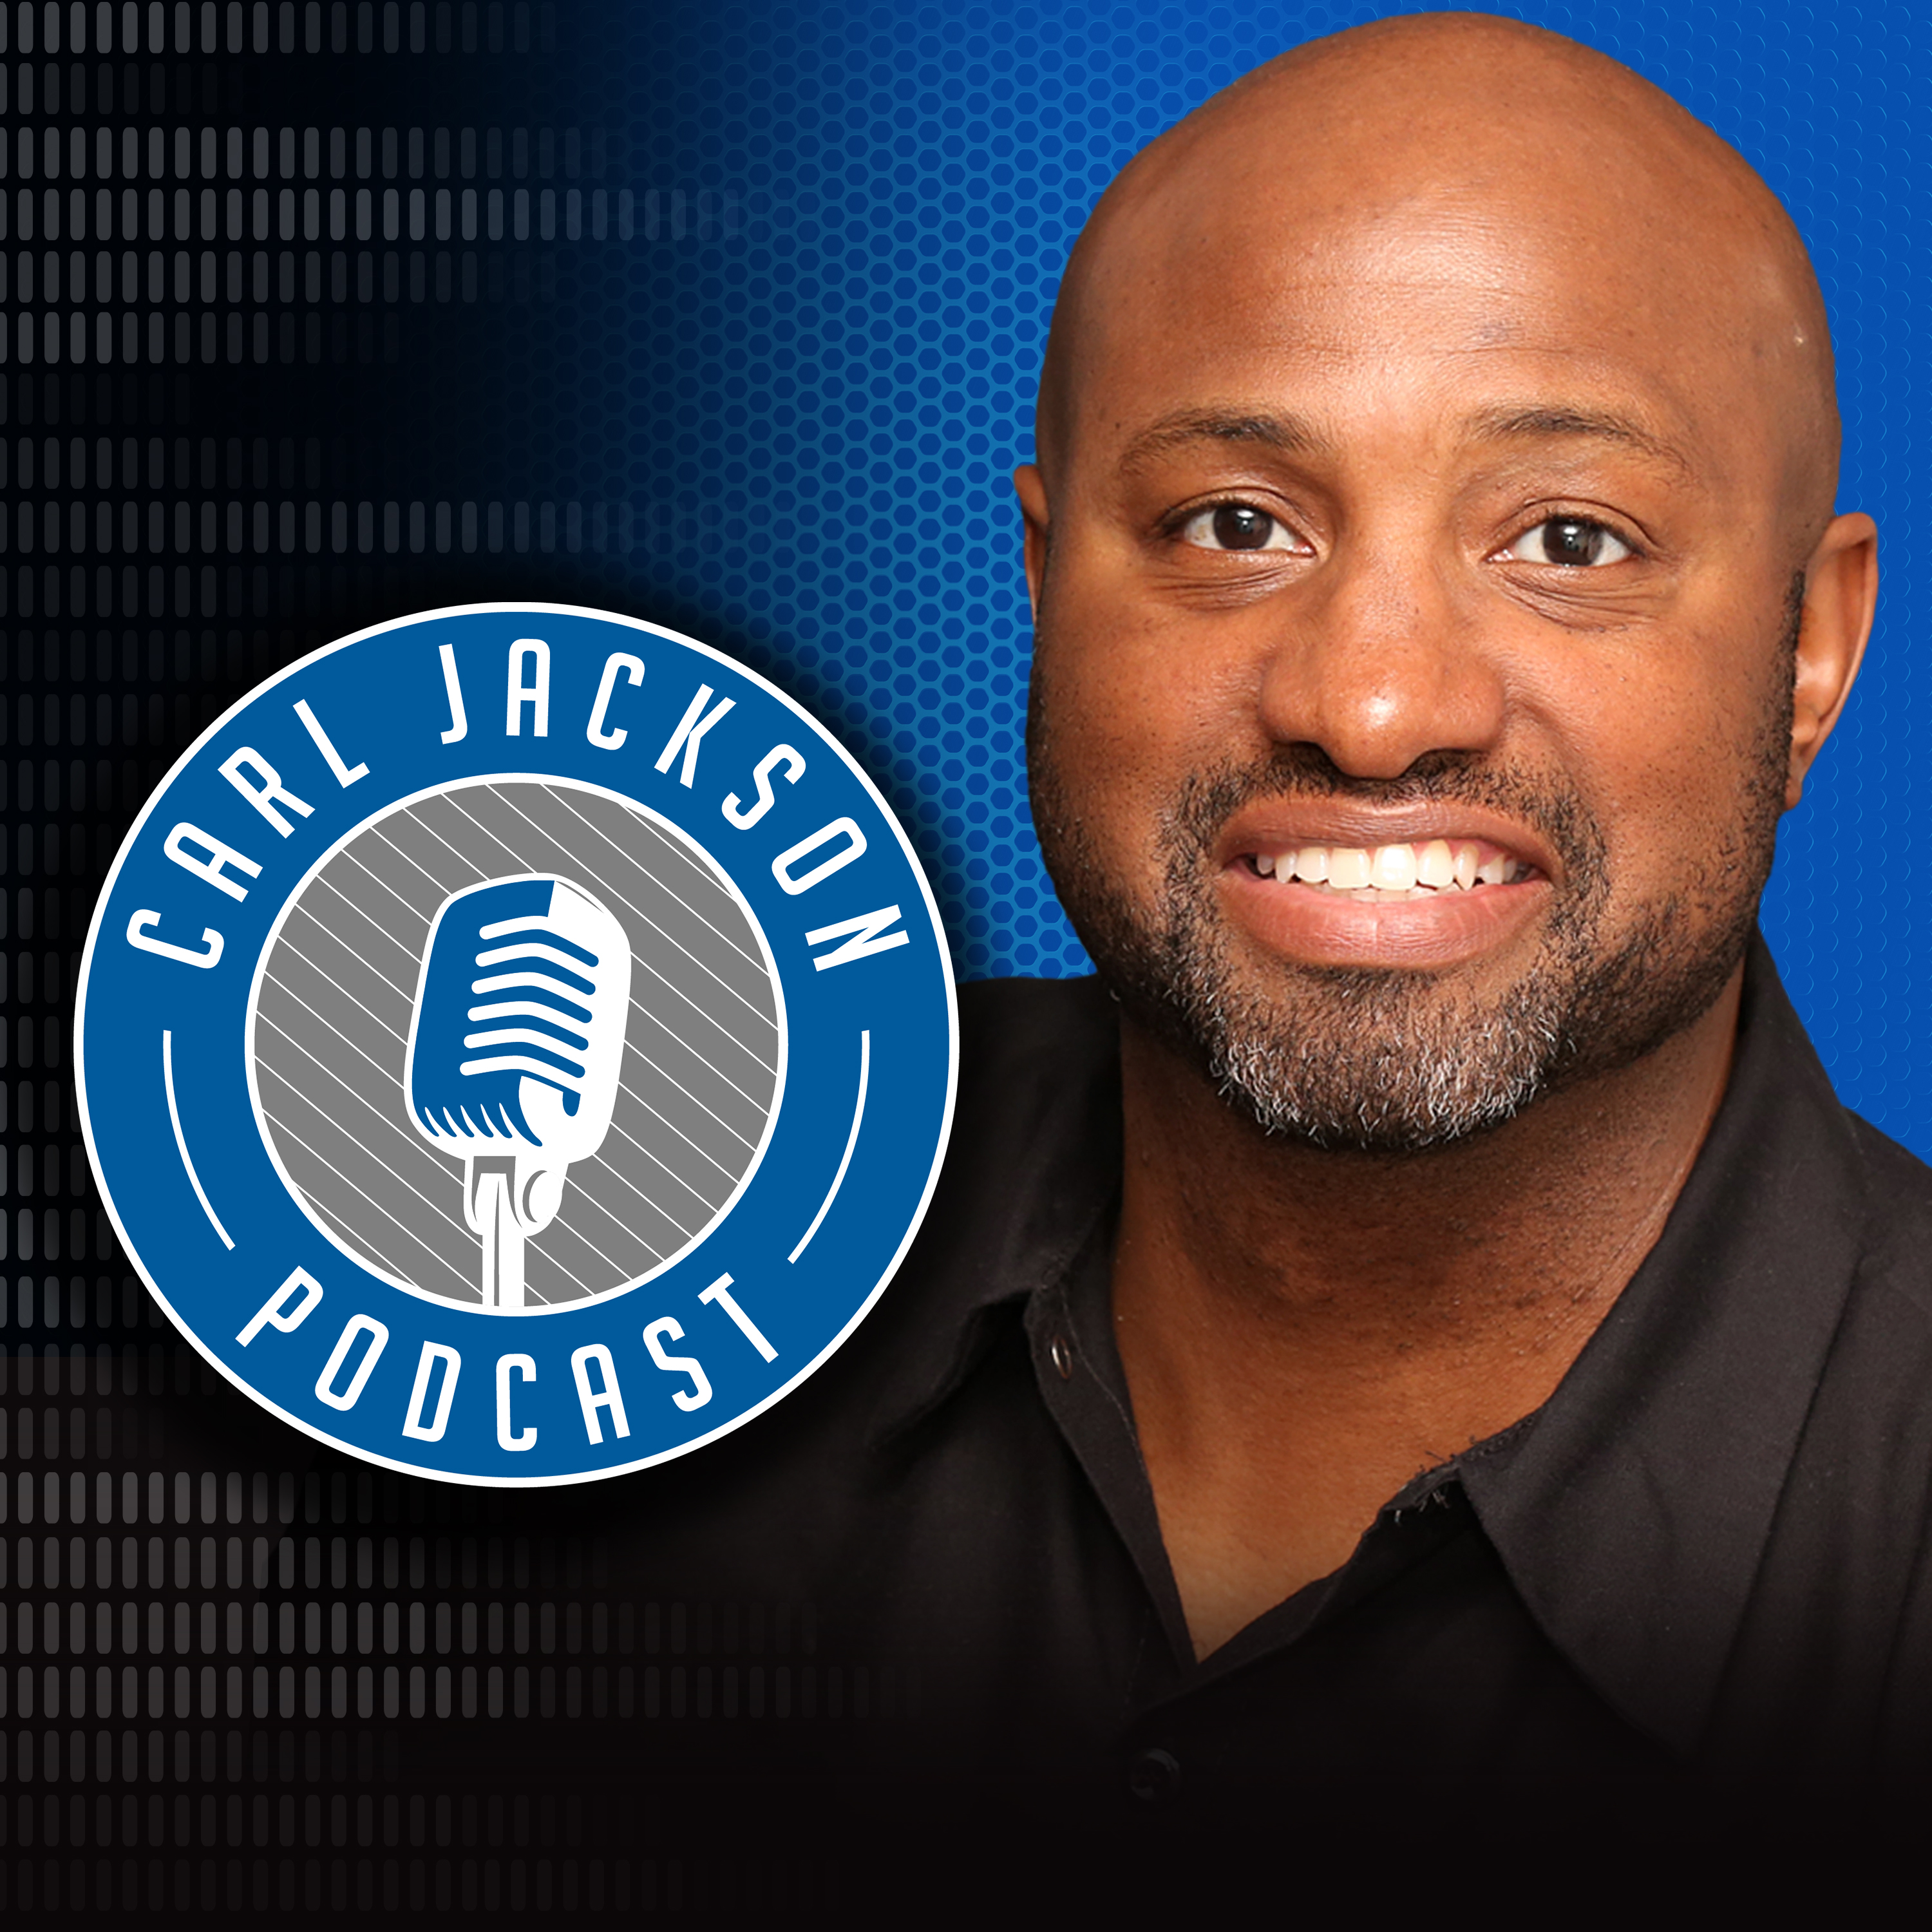 COMING SOON: The Carl Jackson Podcast